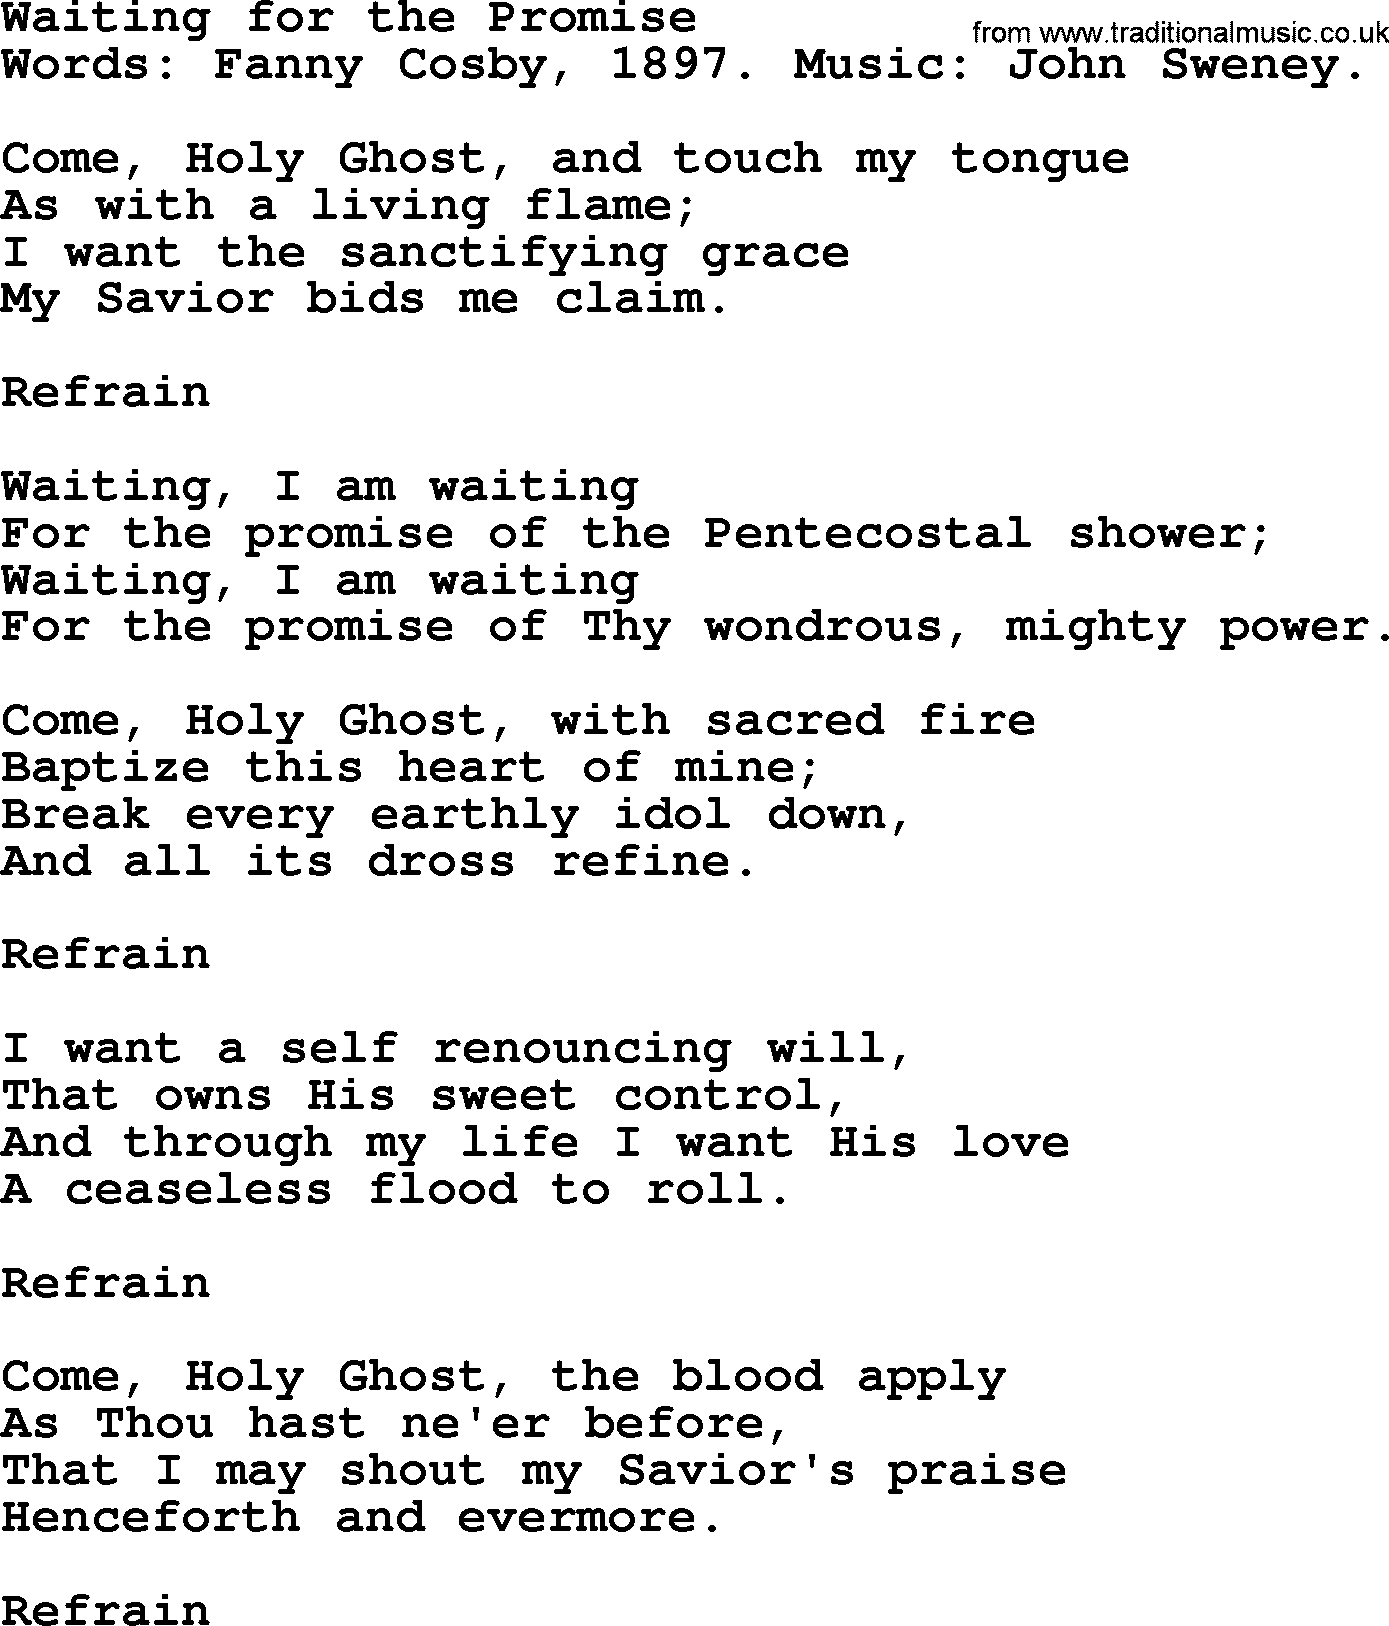 Fanny Crosby song: Waiting For The Promise, lyrics